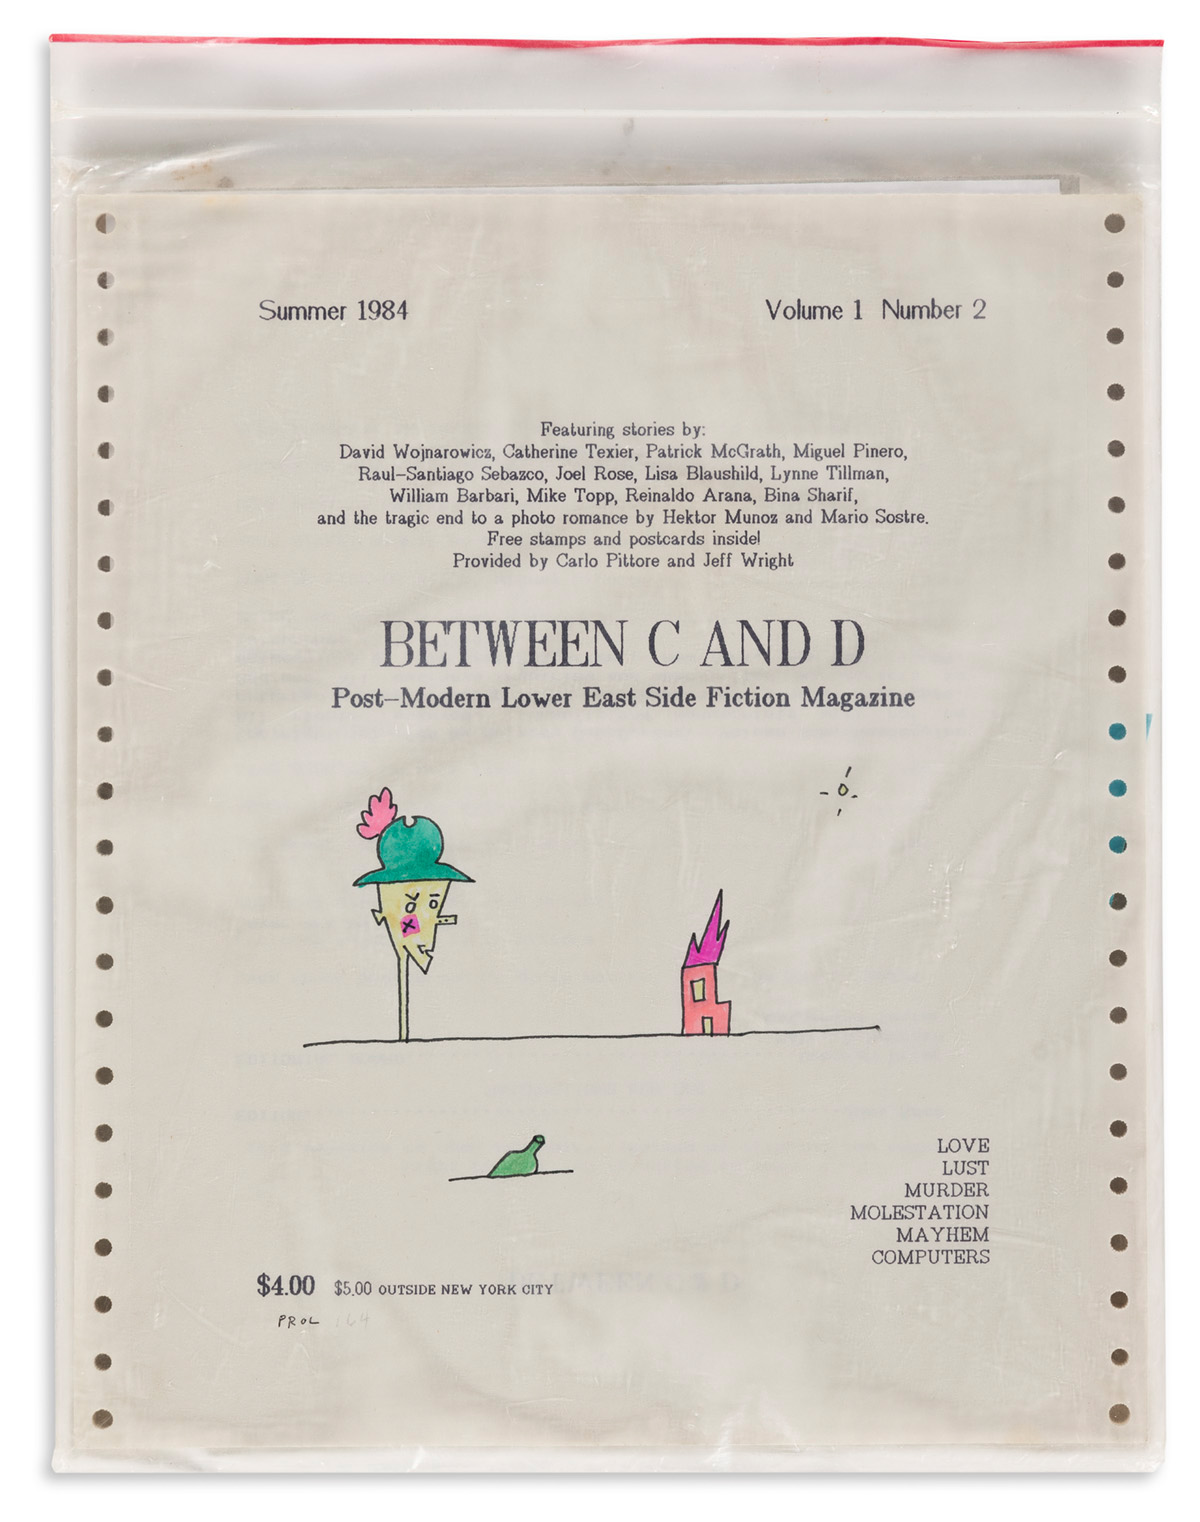 JOEL ROSE and CATHERINE TEXIER; editors. Between C and D Magazine. Volume 1, Numbers 2 and 4.